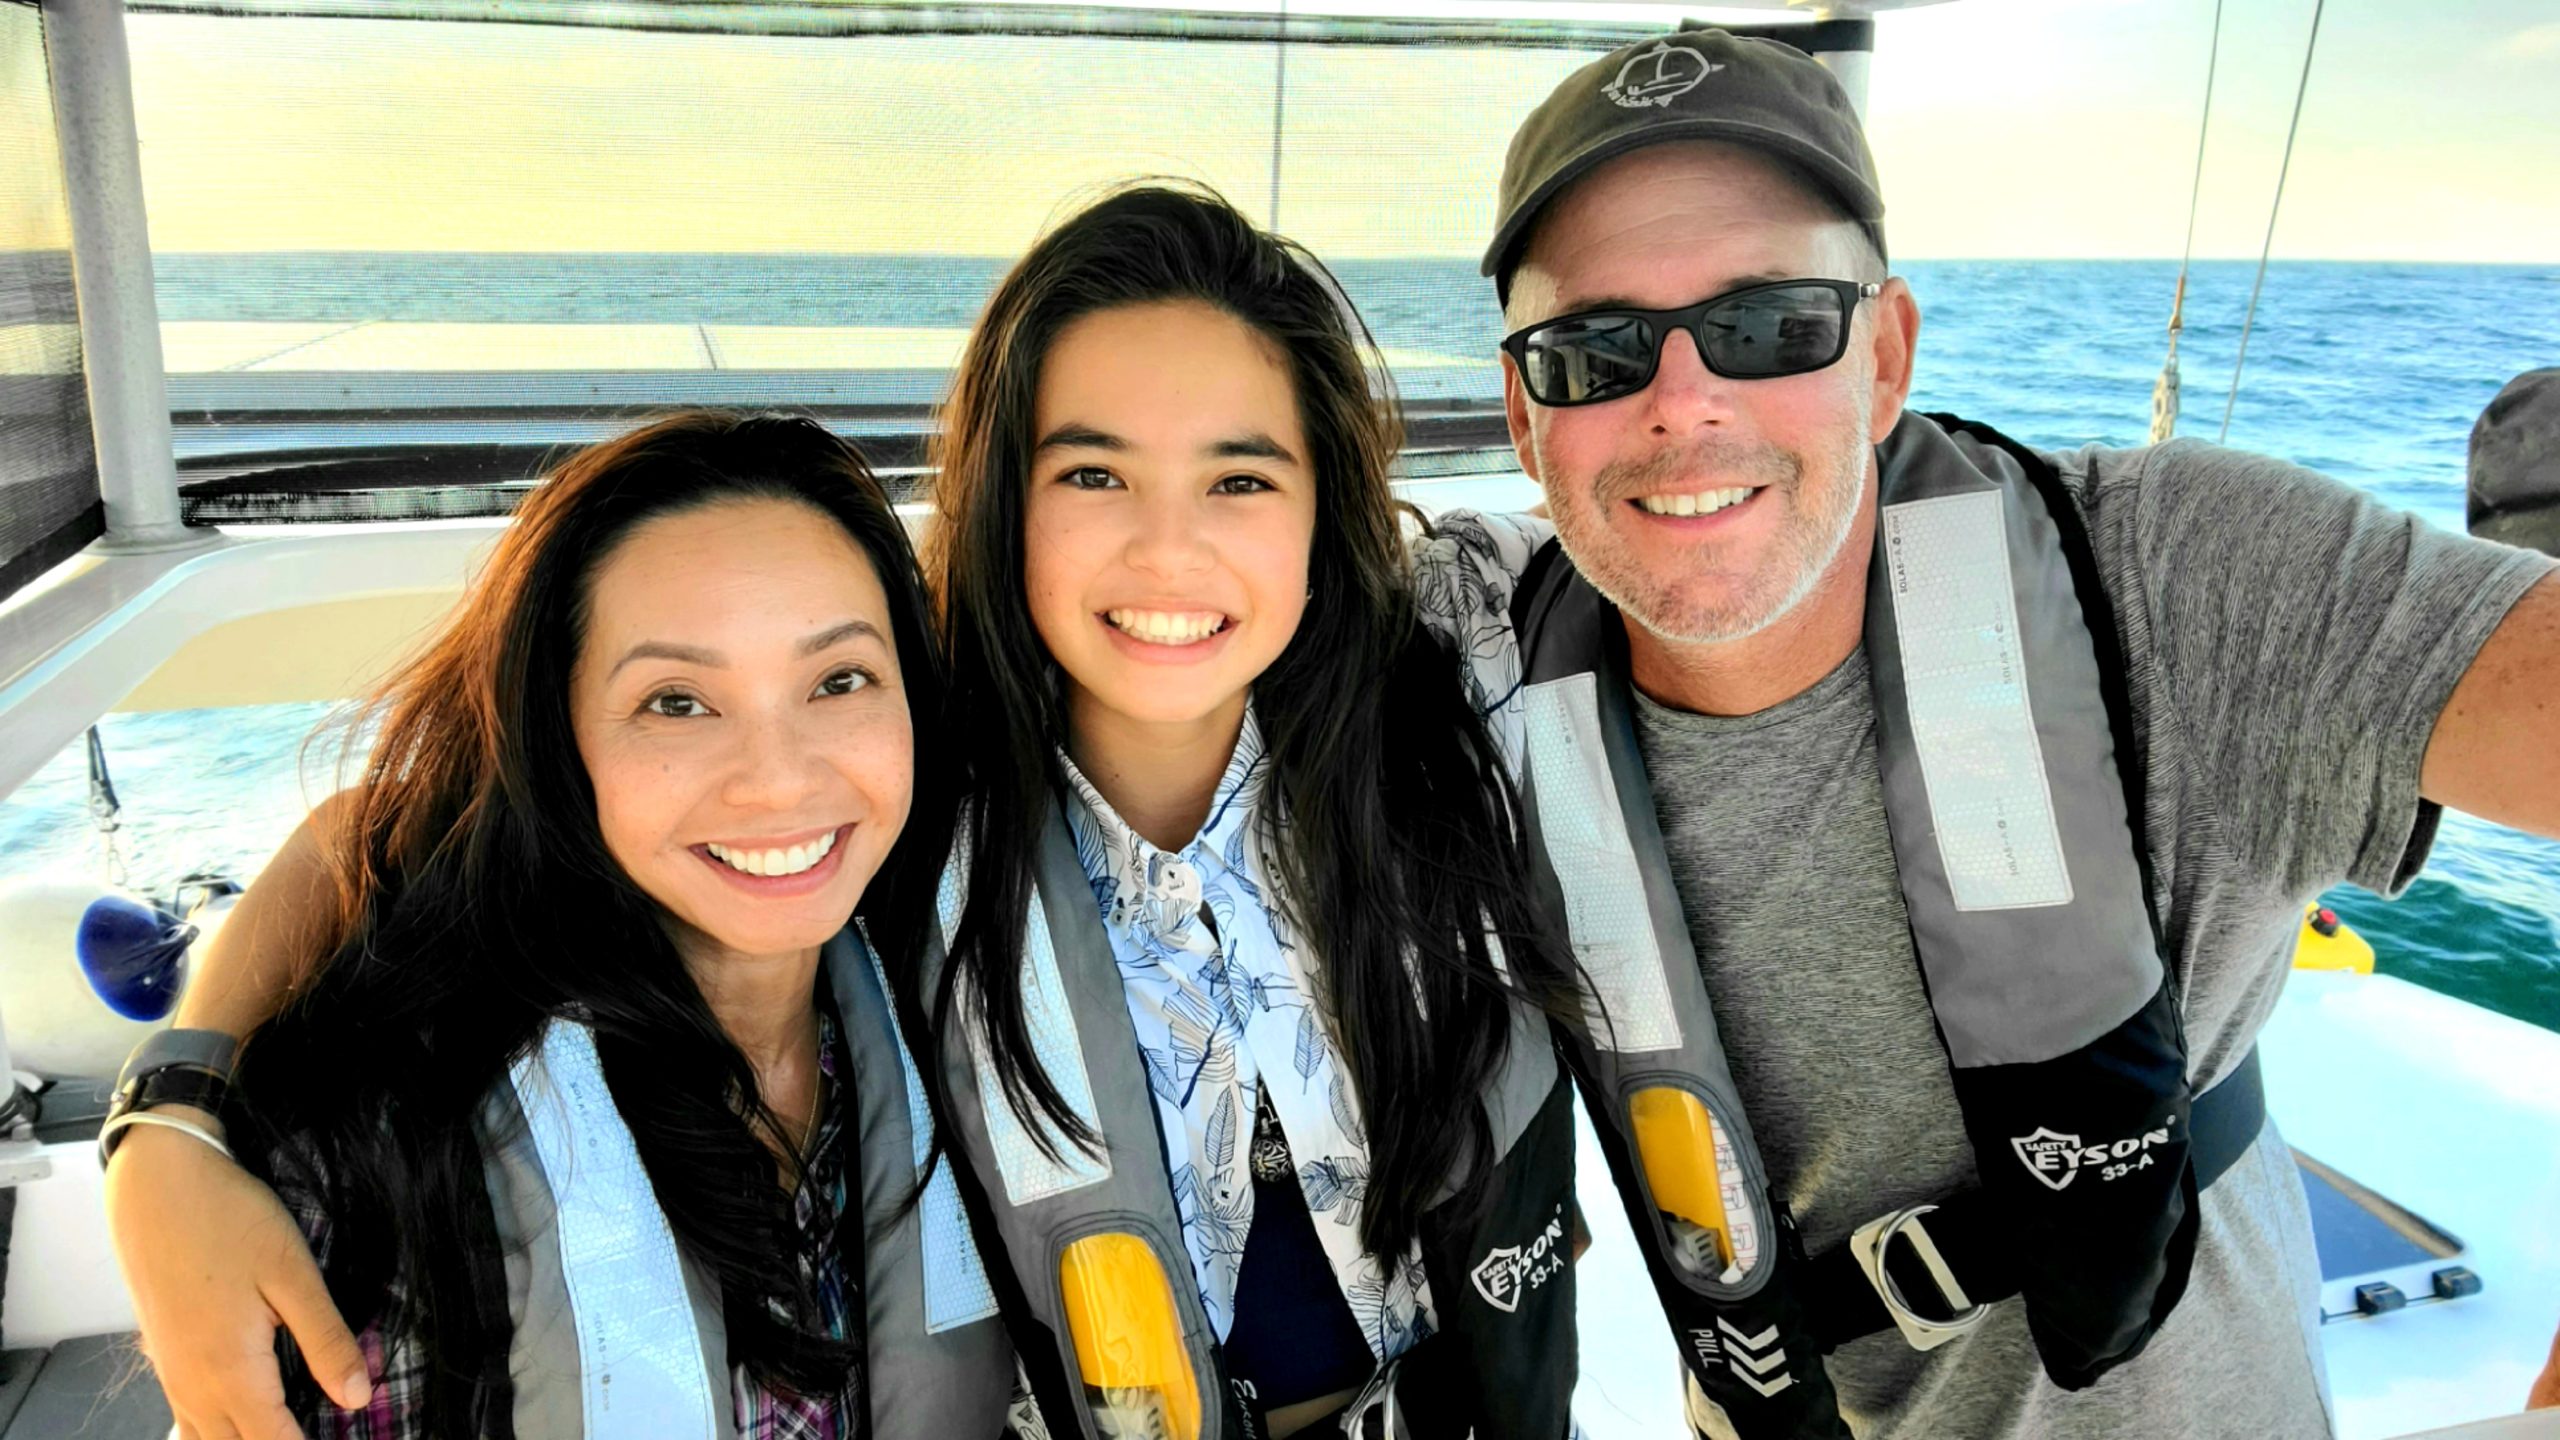 Teal, Linh, and Emma smiling for a photo on their sailboat